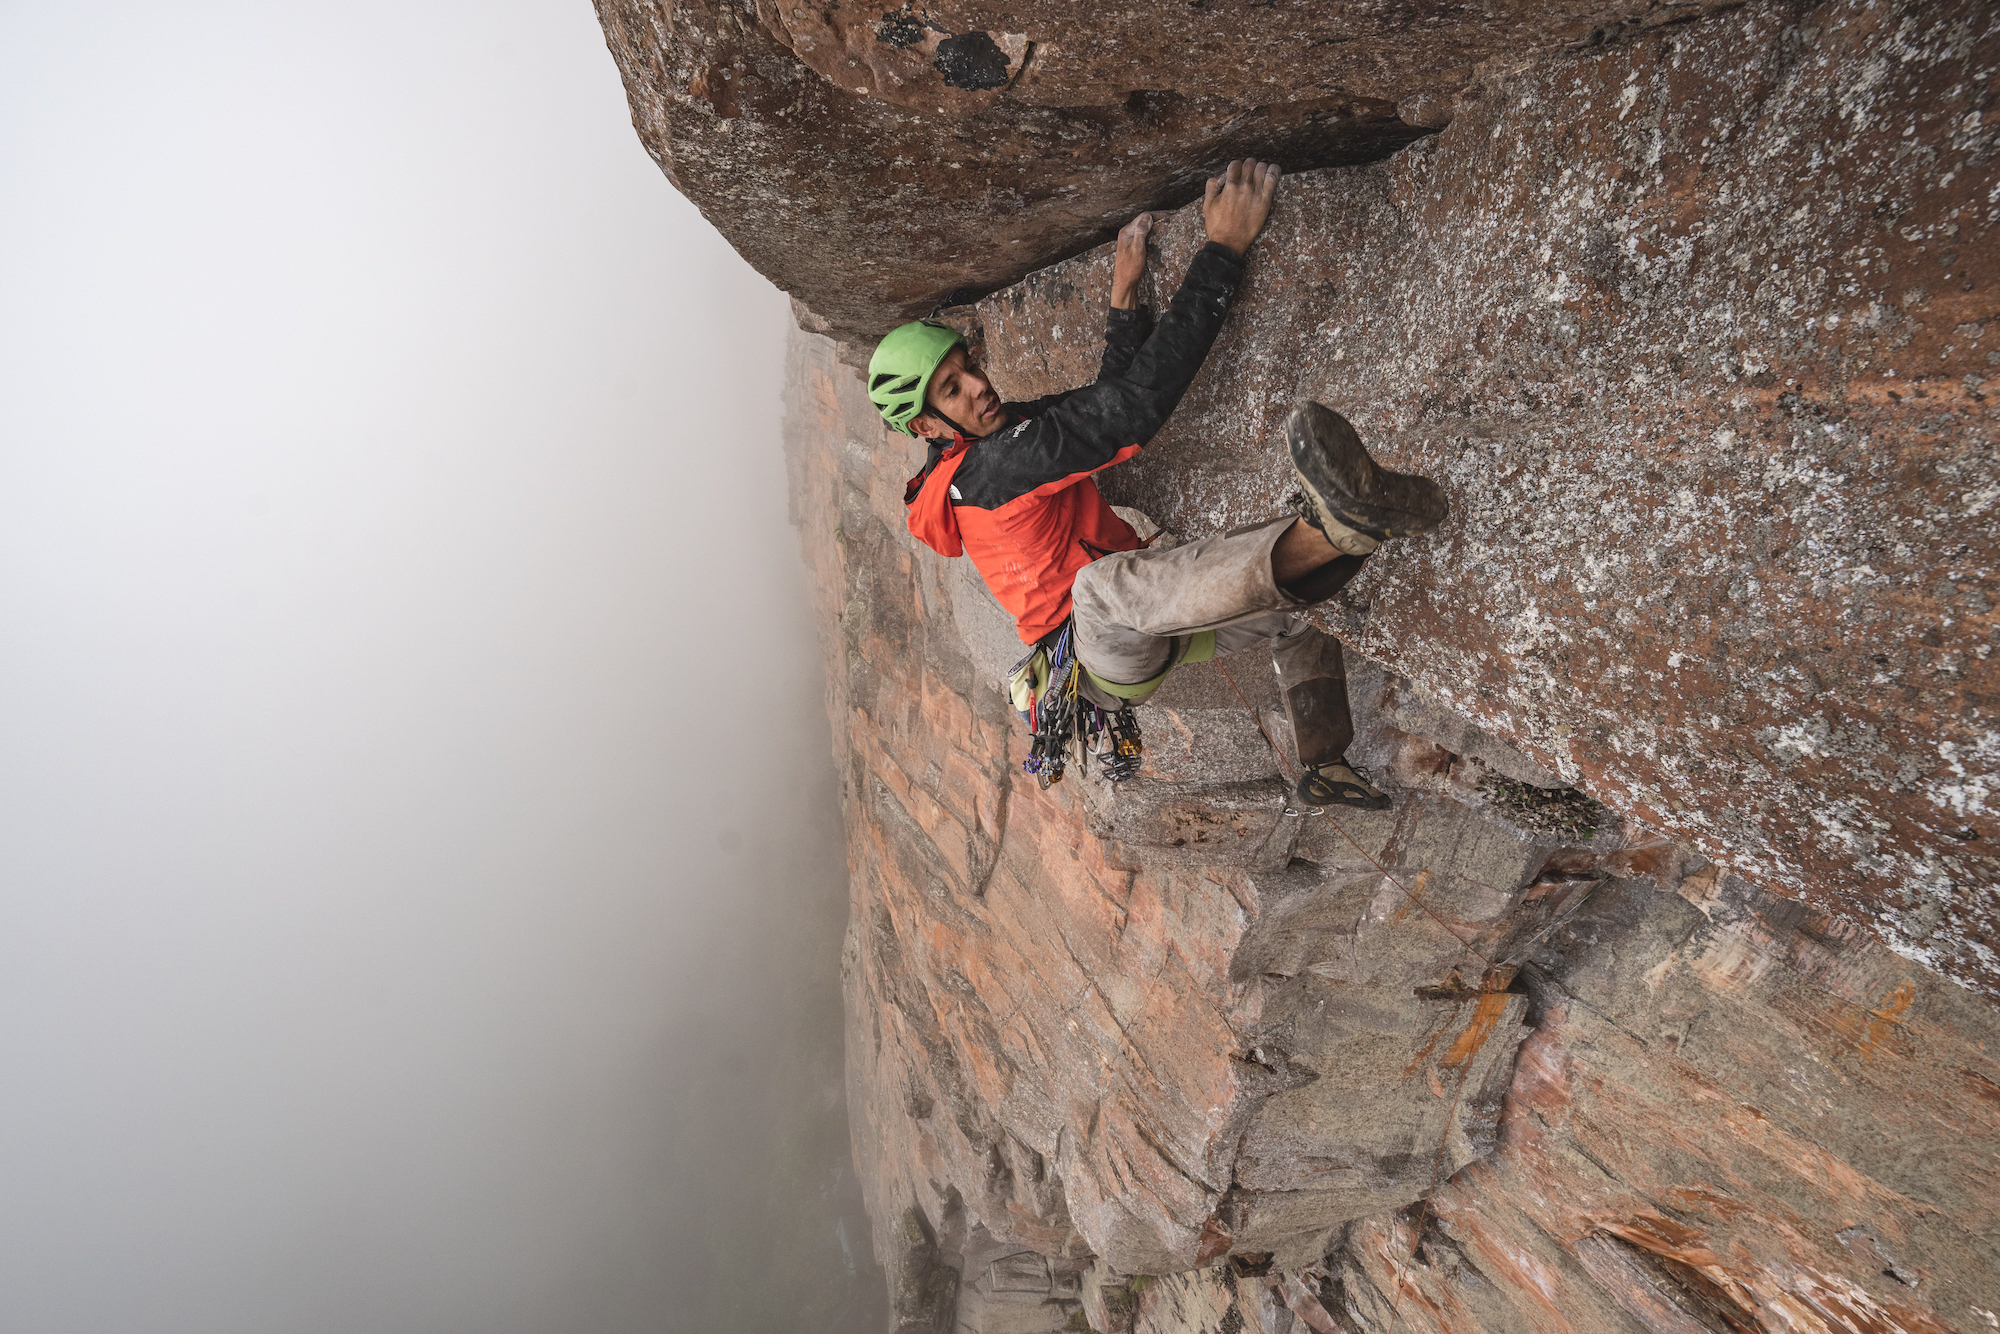 Alex Honnold climbing as part of the Disney+ Earth Day special "Explorer: The Last Tepui,” from National Geographic which will stream on April 22nd